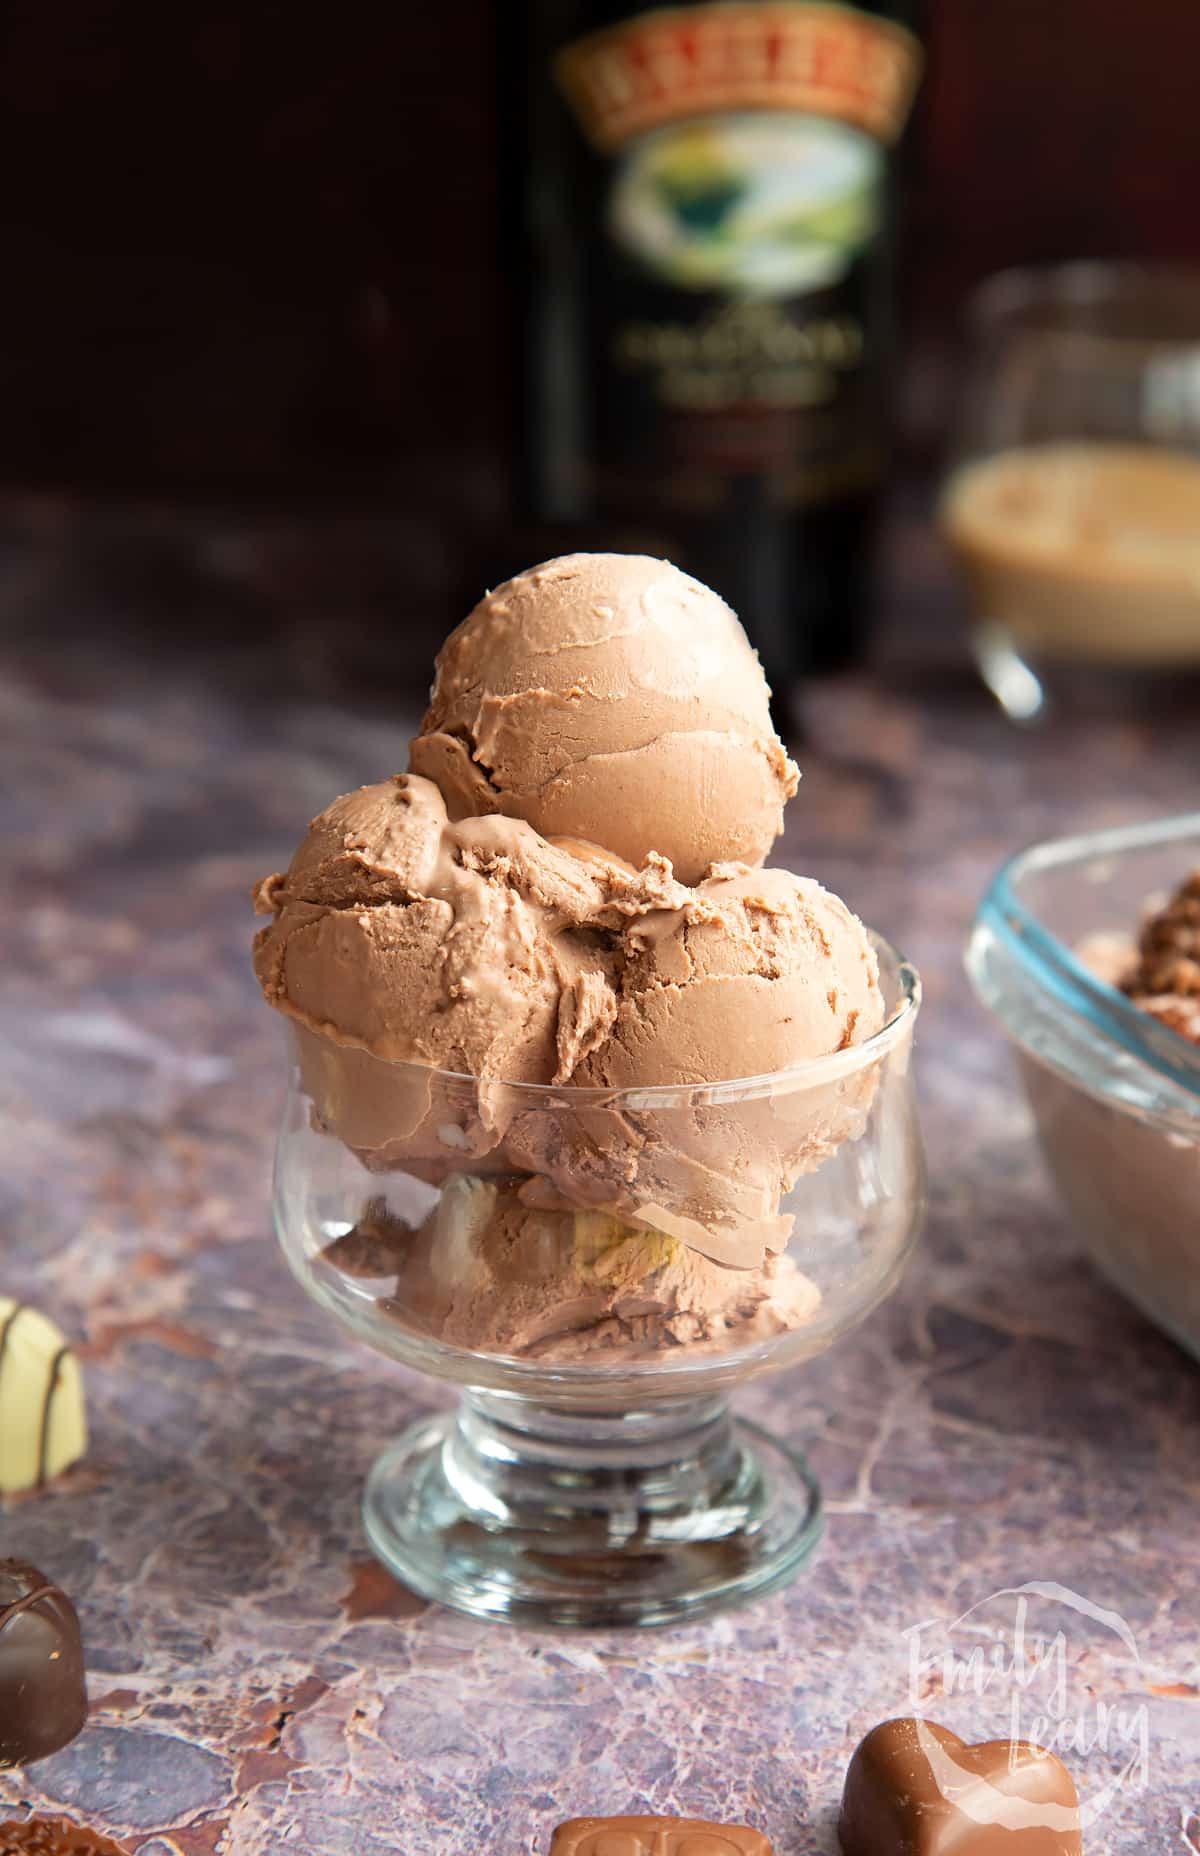 baileys ice cream in scoops in a glass dsessert bowl.